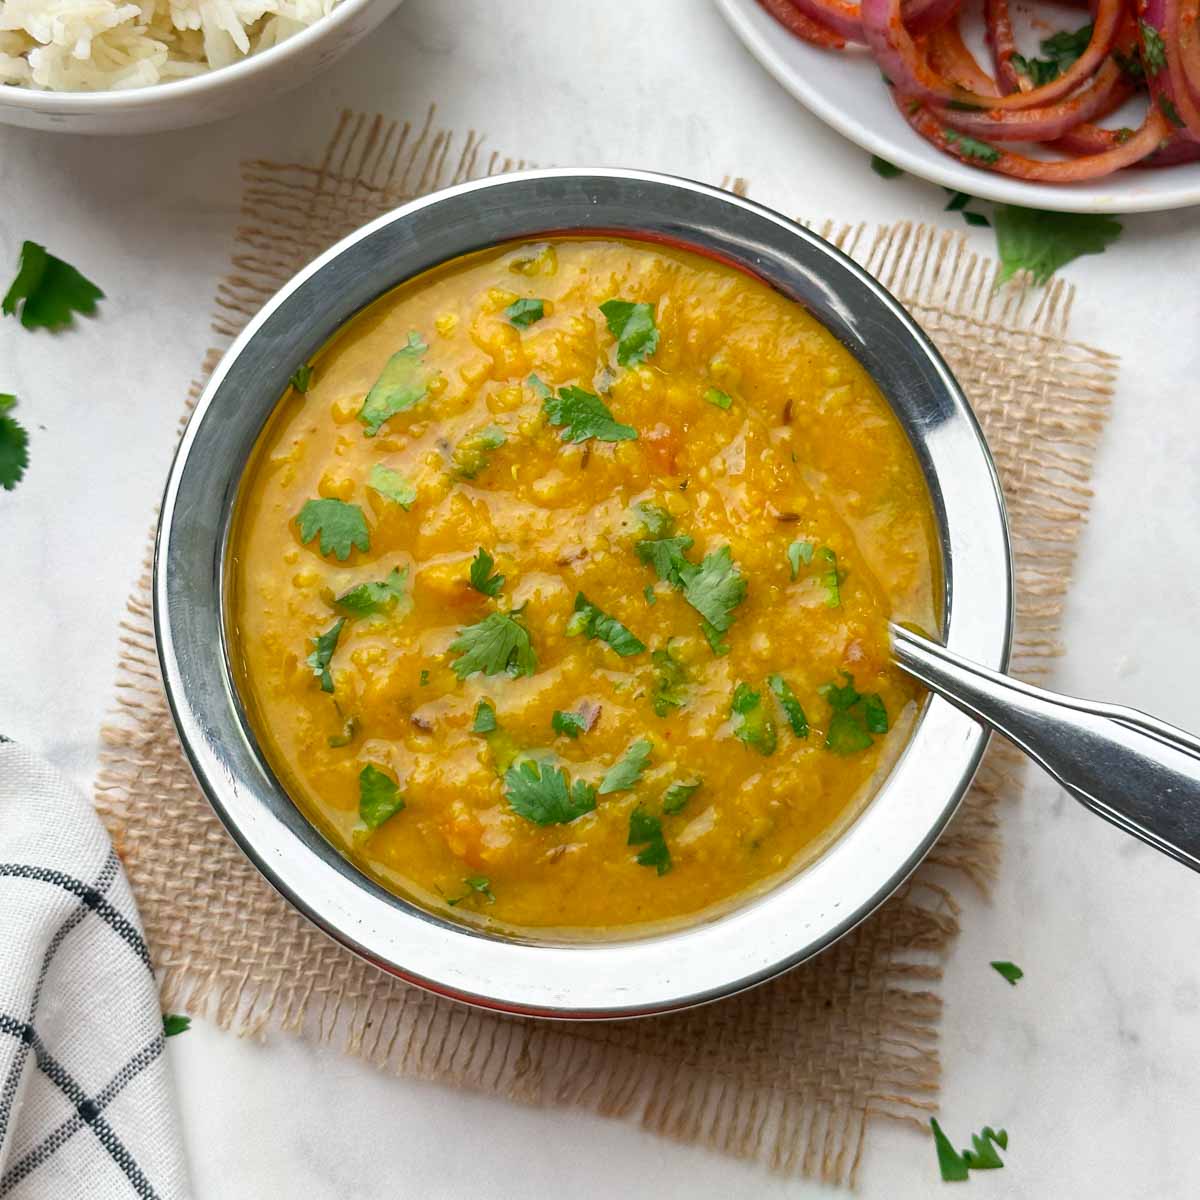 https://www.indianveggiedelight.com/wp-content/uploads/2022/12/dal-fry-stovetop-featured.jpg